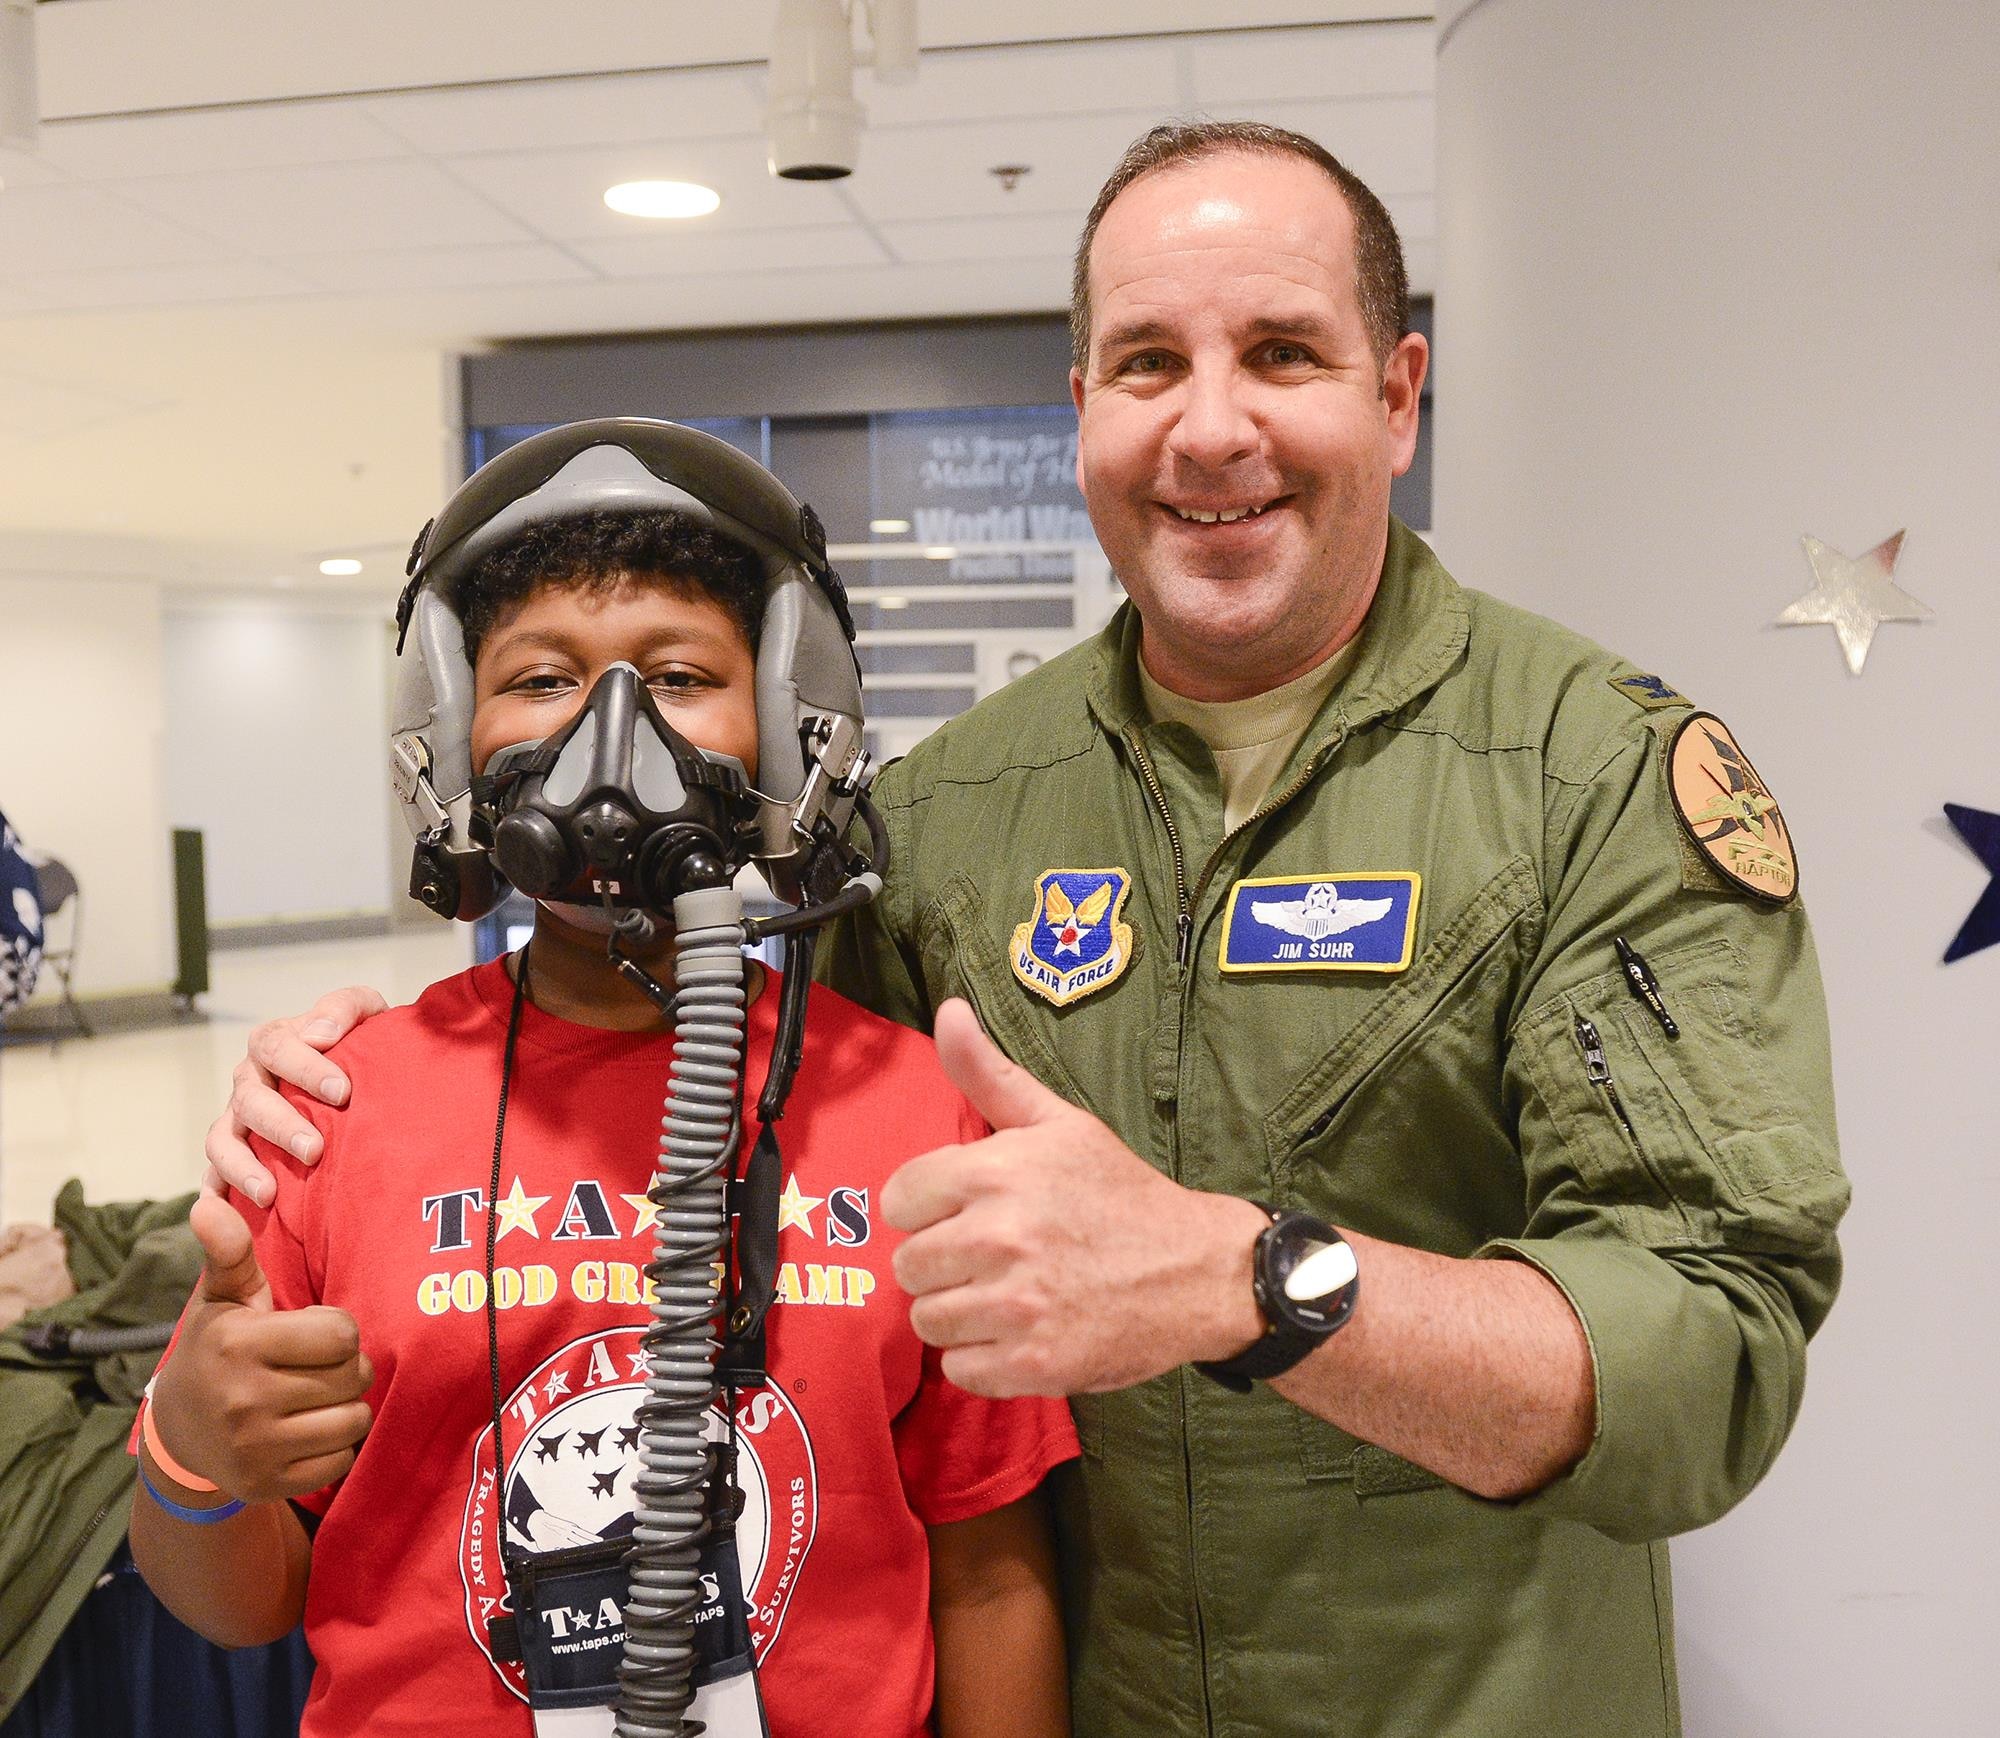 Col. Jim Suhr, an F-22 Raptor pilot, helps a child try on flight gear at the Pentagon in Washington, D.C., May 27, 2016. Defense Secretary Ash Carter and his wife Stephanie hosted more than 300 family members during family night in the Pentagon. (U.S. Air Force photo/Andy Morataya) 